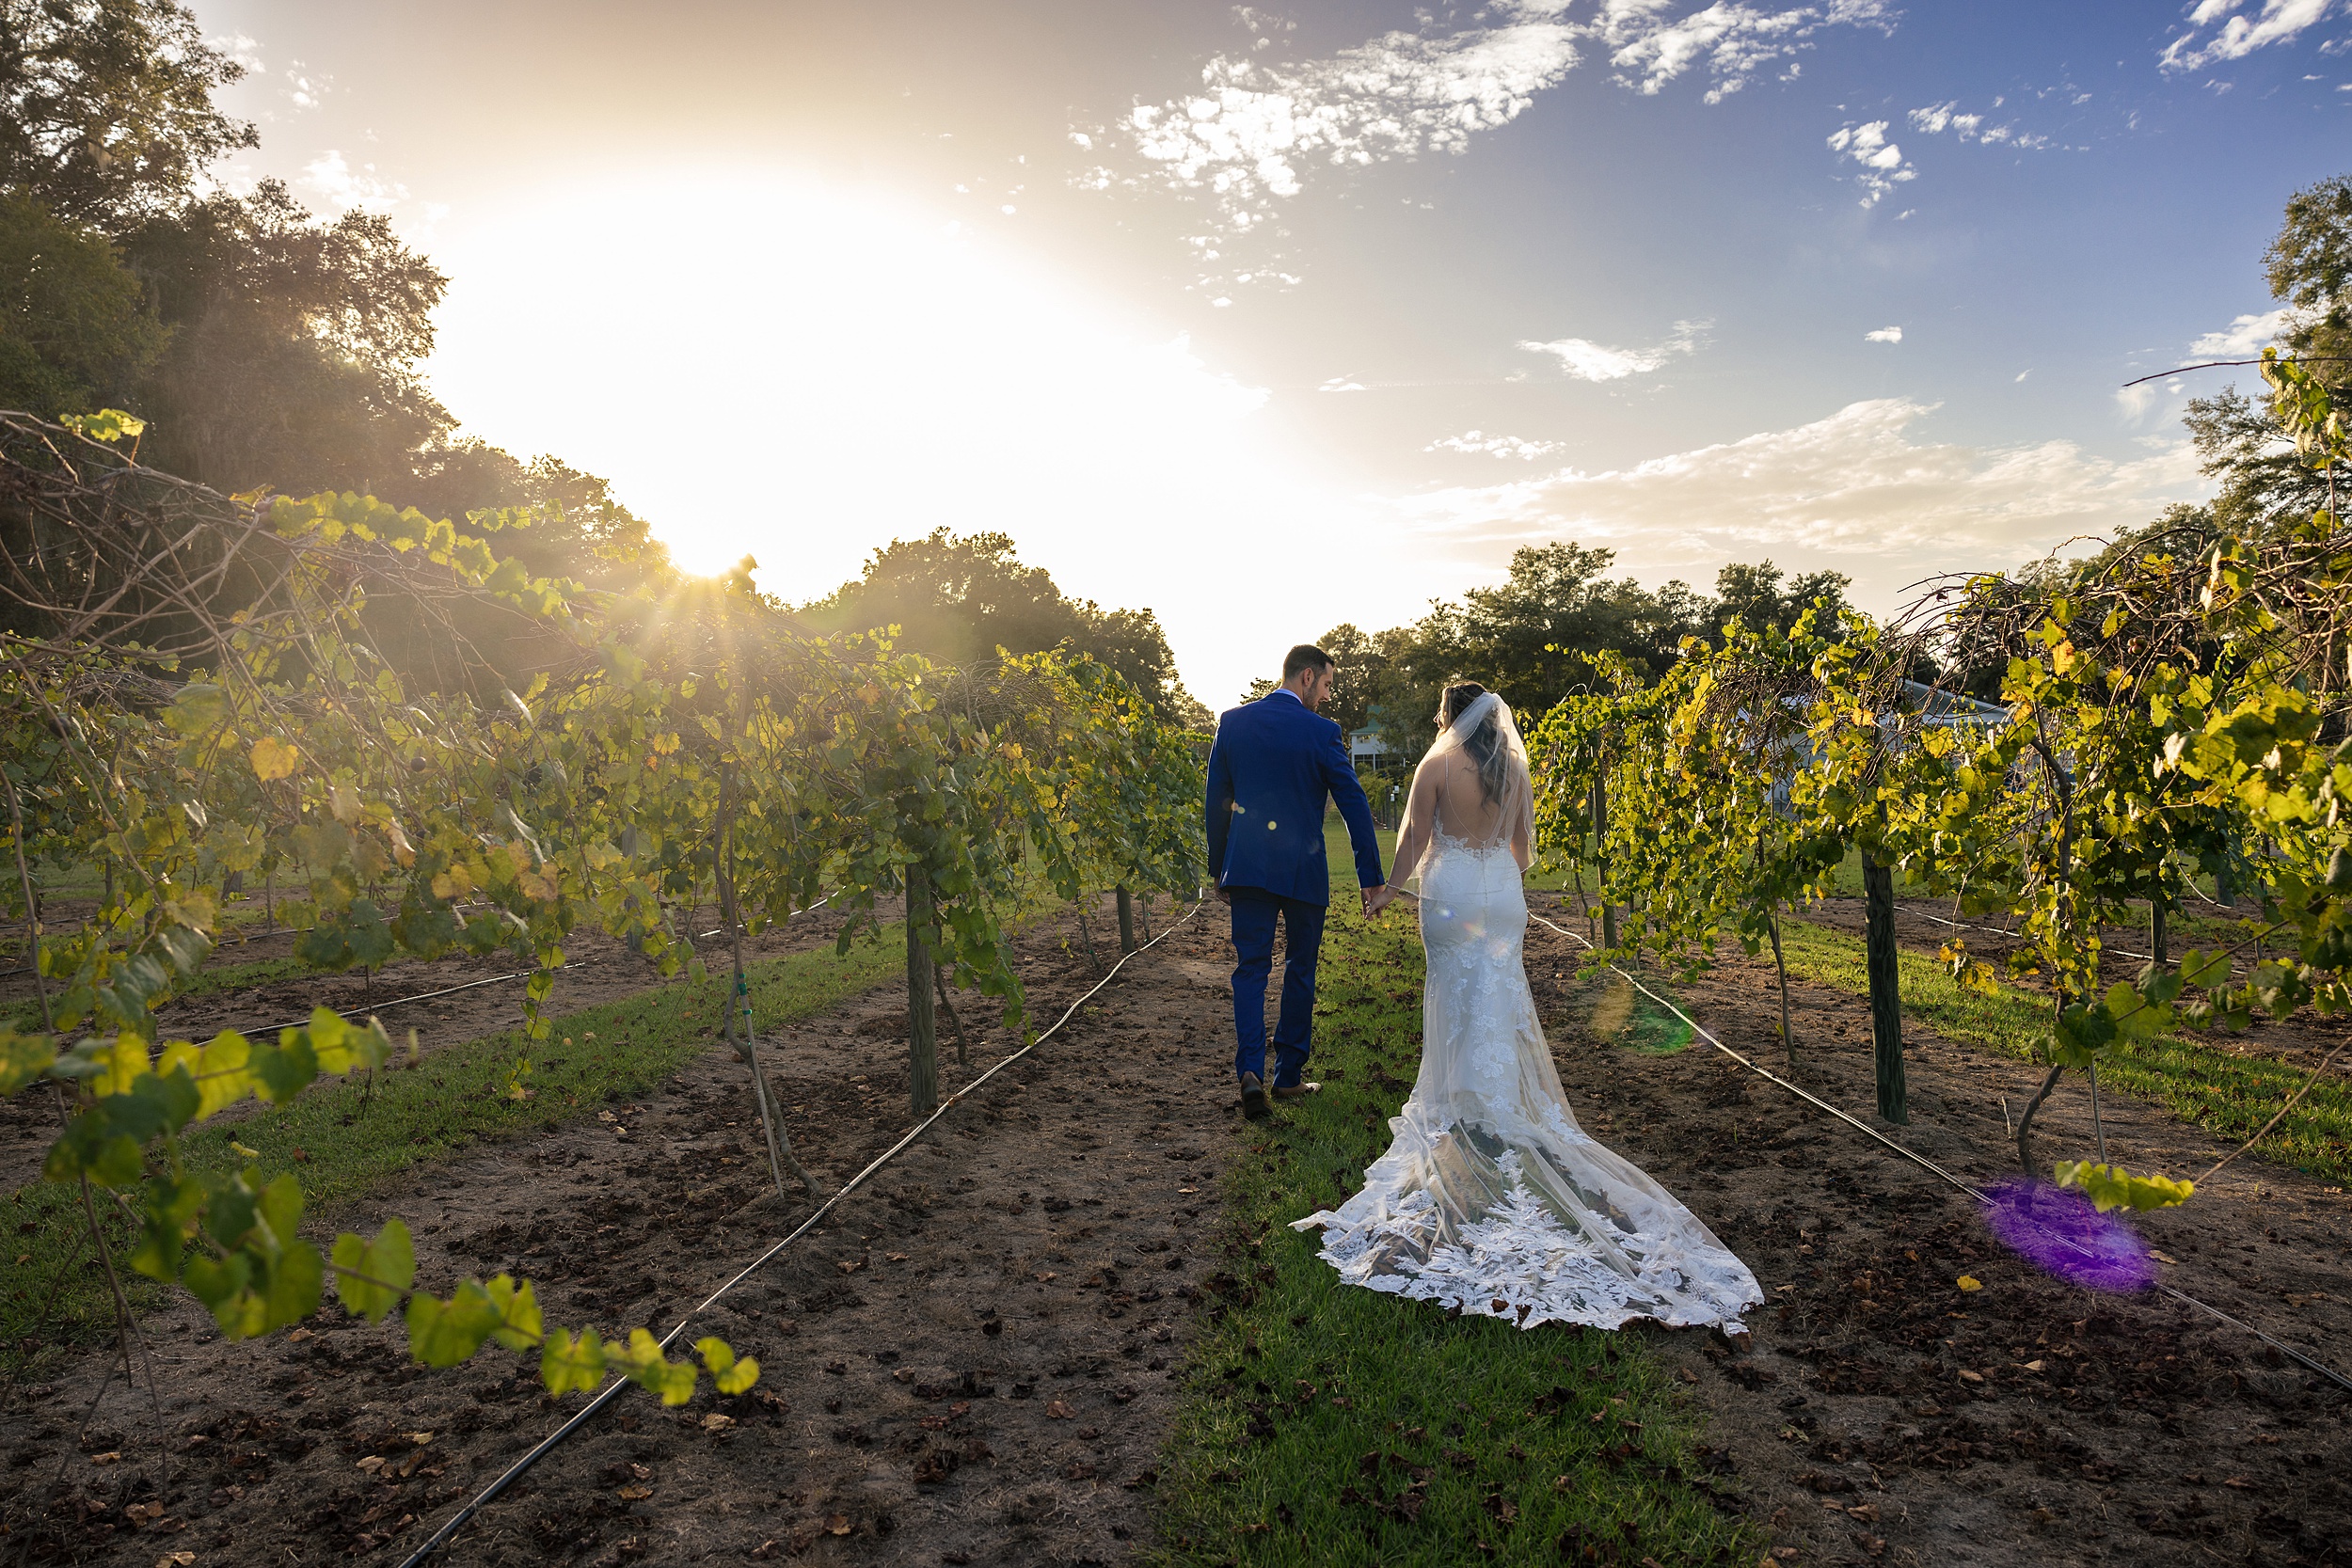 A bride and groom hold hands while walking through a vineyard at sunset at one of the great orlando wedding venues